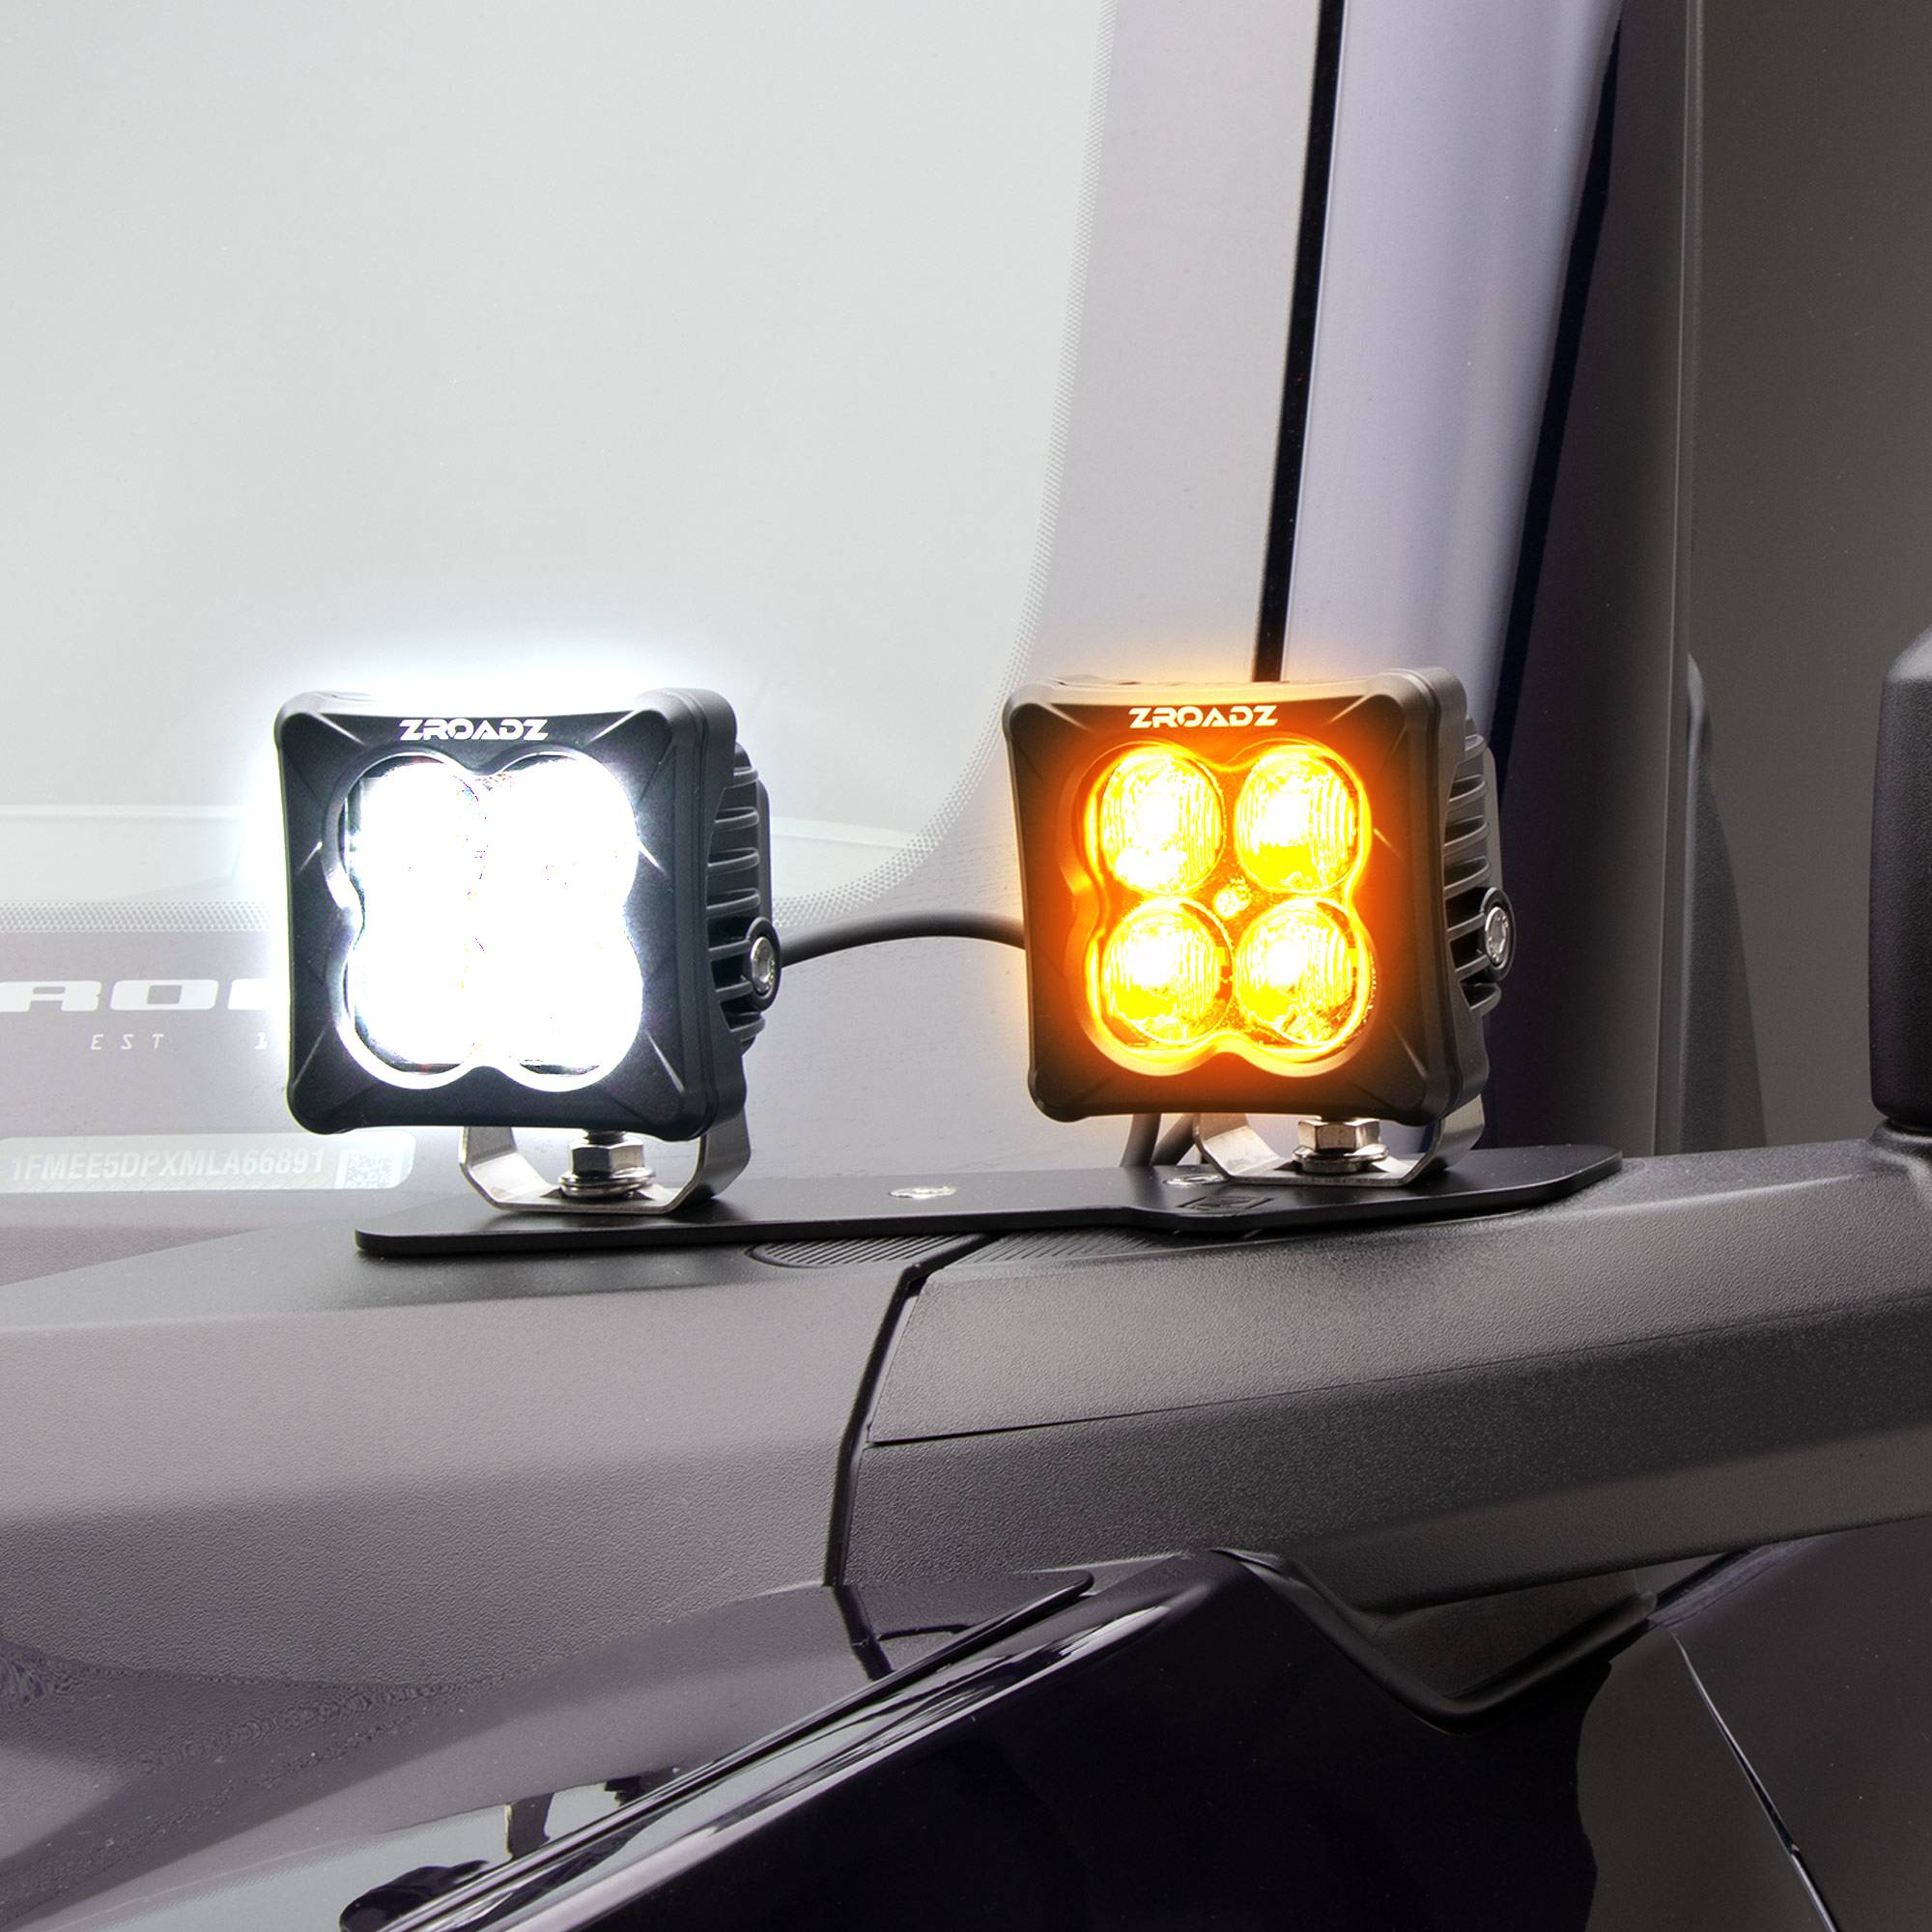 ZROADZ OFF ROAD PRODUCTS - 2021-2023 Ford Bronco Mirror/Ditch Light LED KIT, Includes (2) 3 inch ZROADZ White and (2) Amber LED Pod Lights - Part # Z365401-KIT4AW